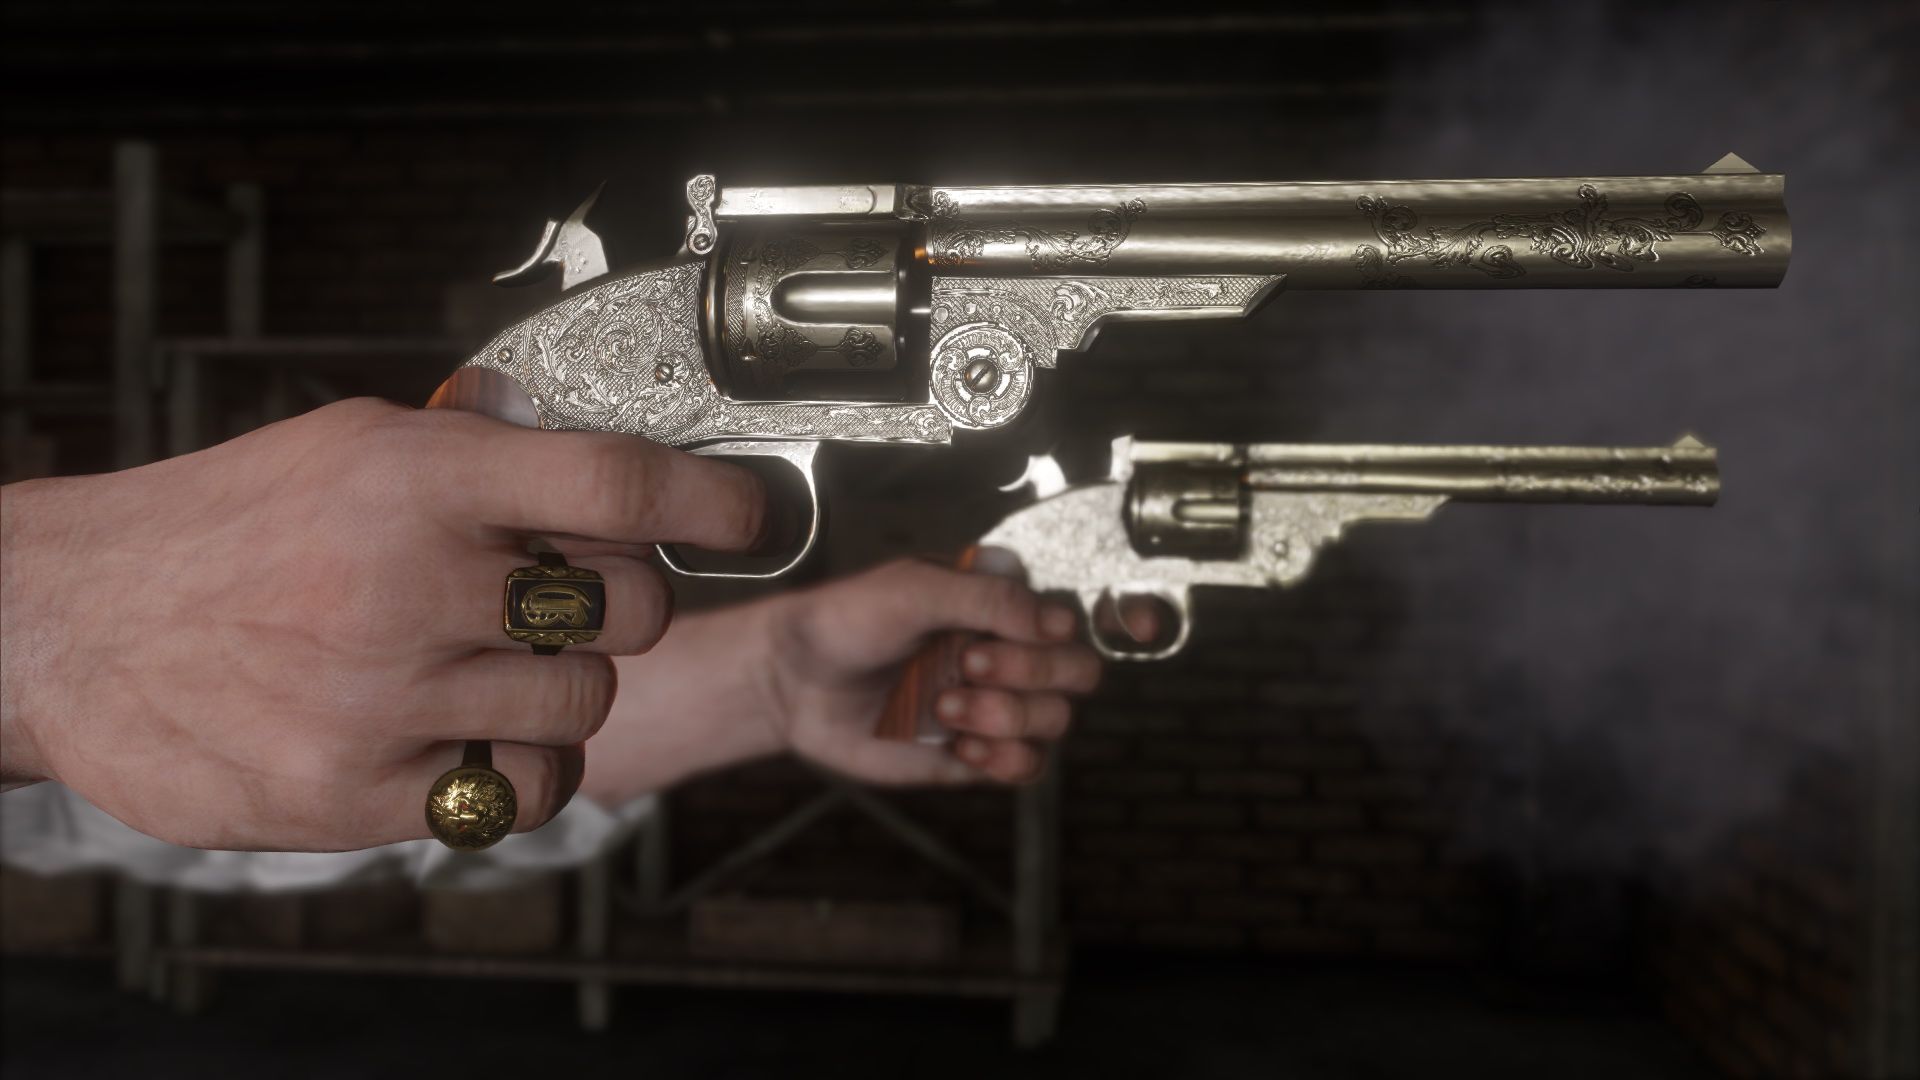 Red Dead Redemption 2 20 Strongest Weapons (And 10 That Are Worthless) Ranked